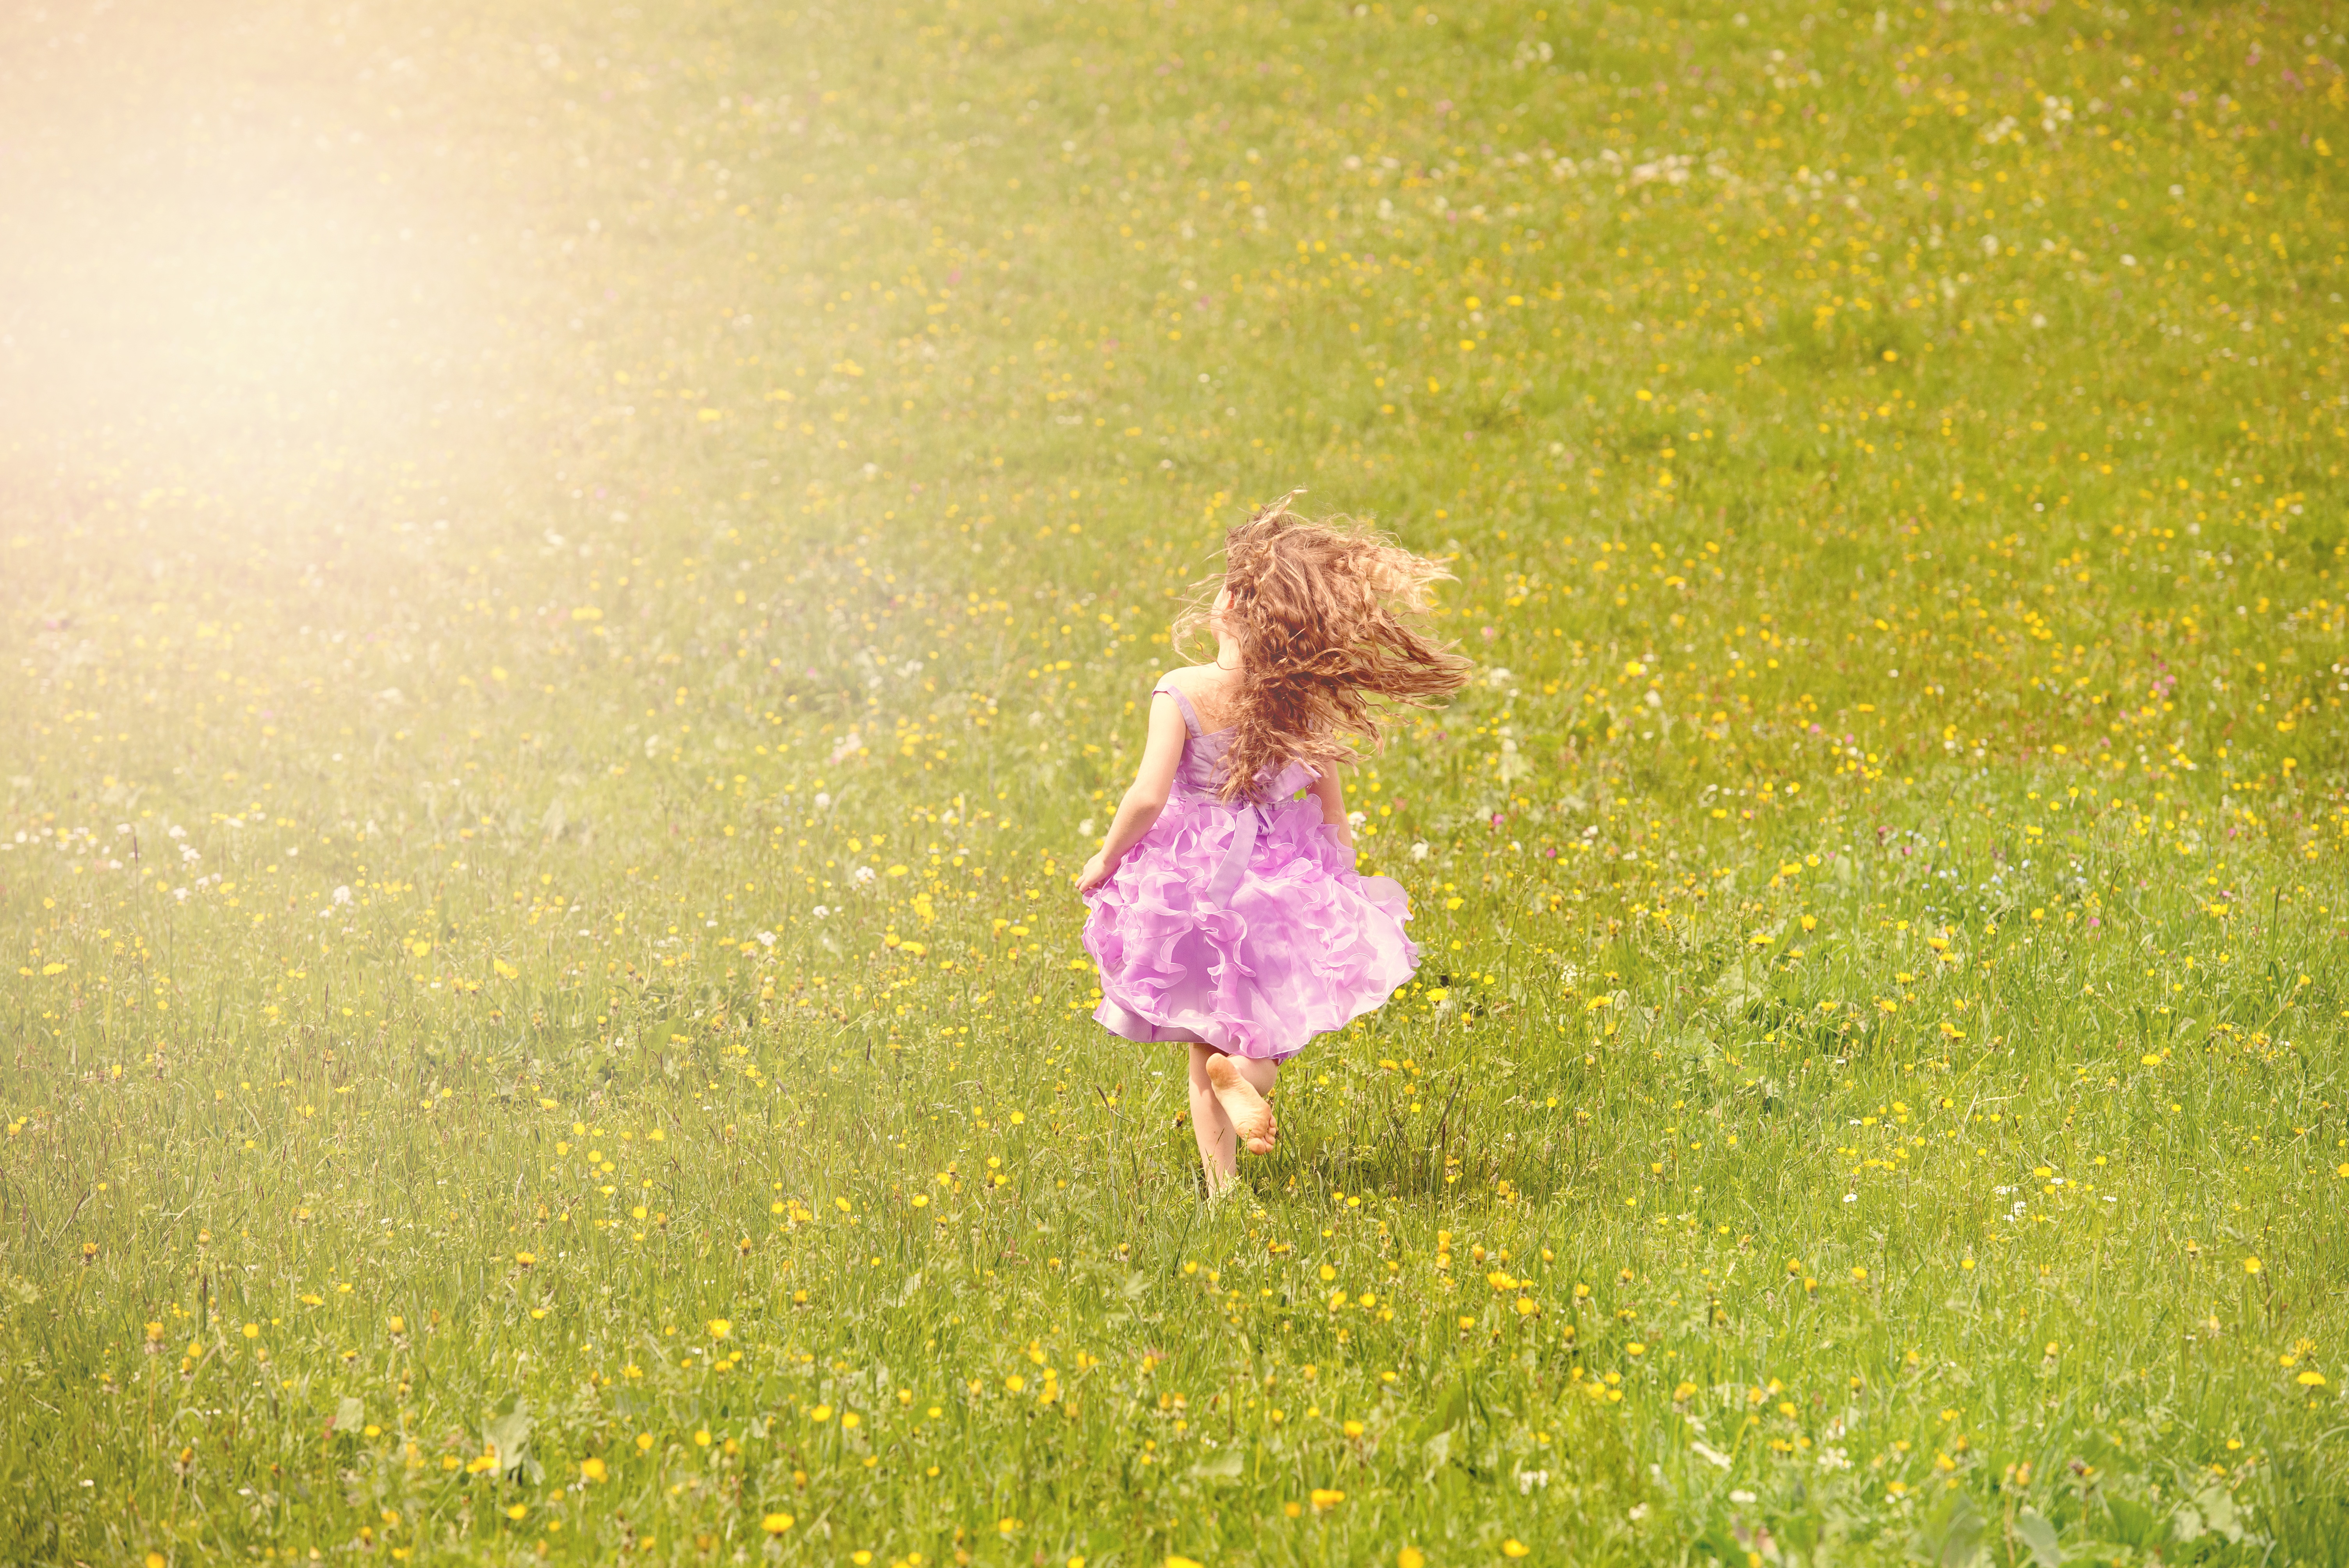 pleasant memories of a carefree child skipping 